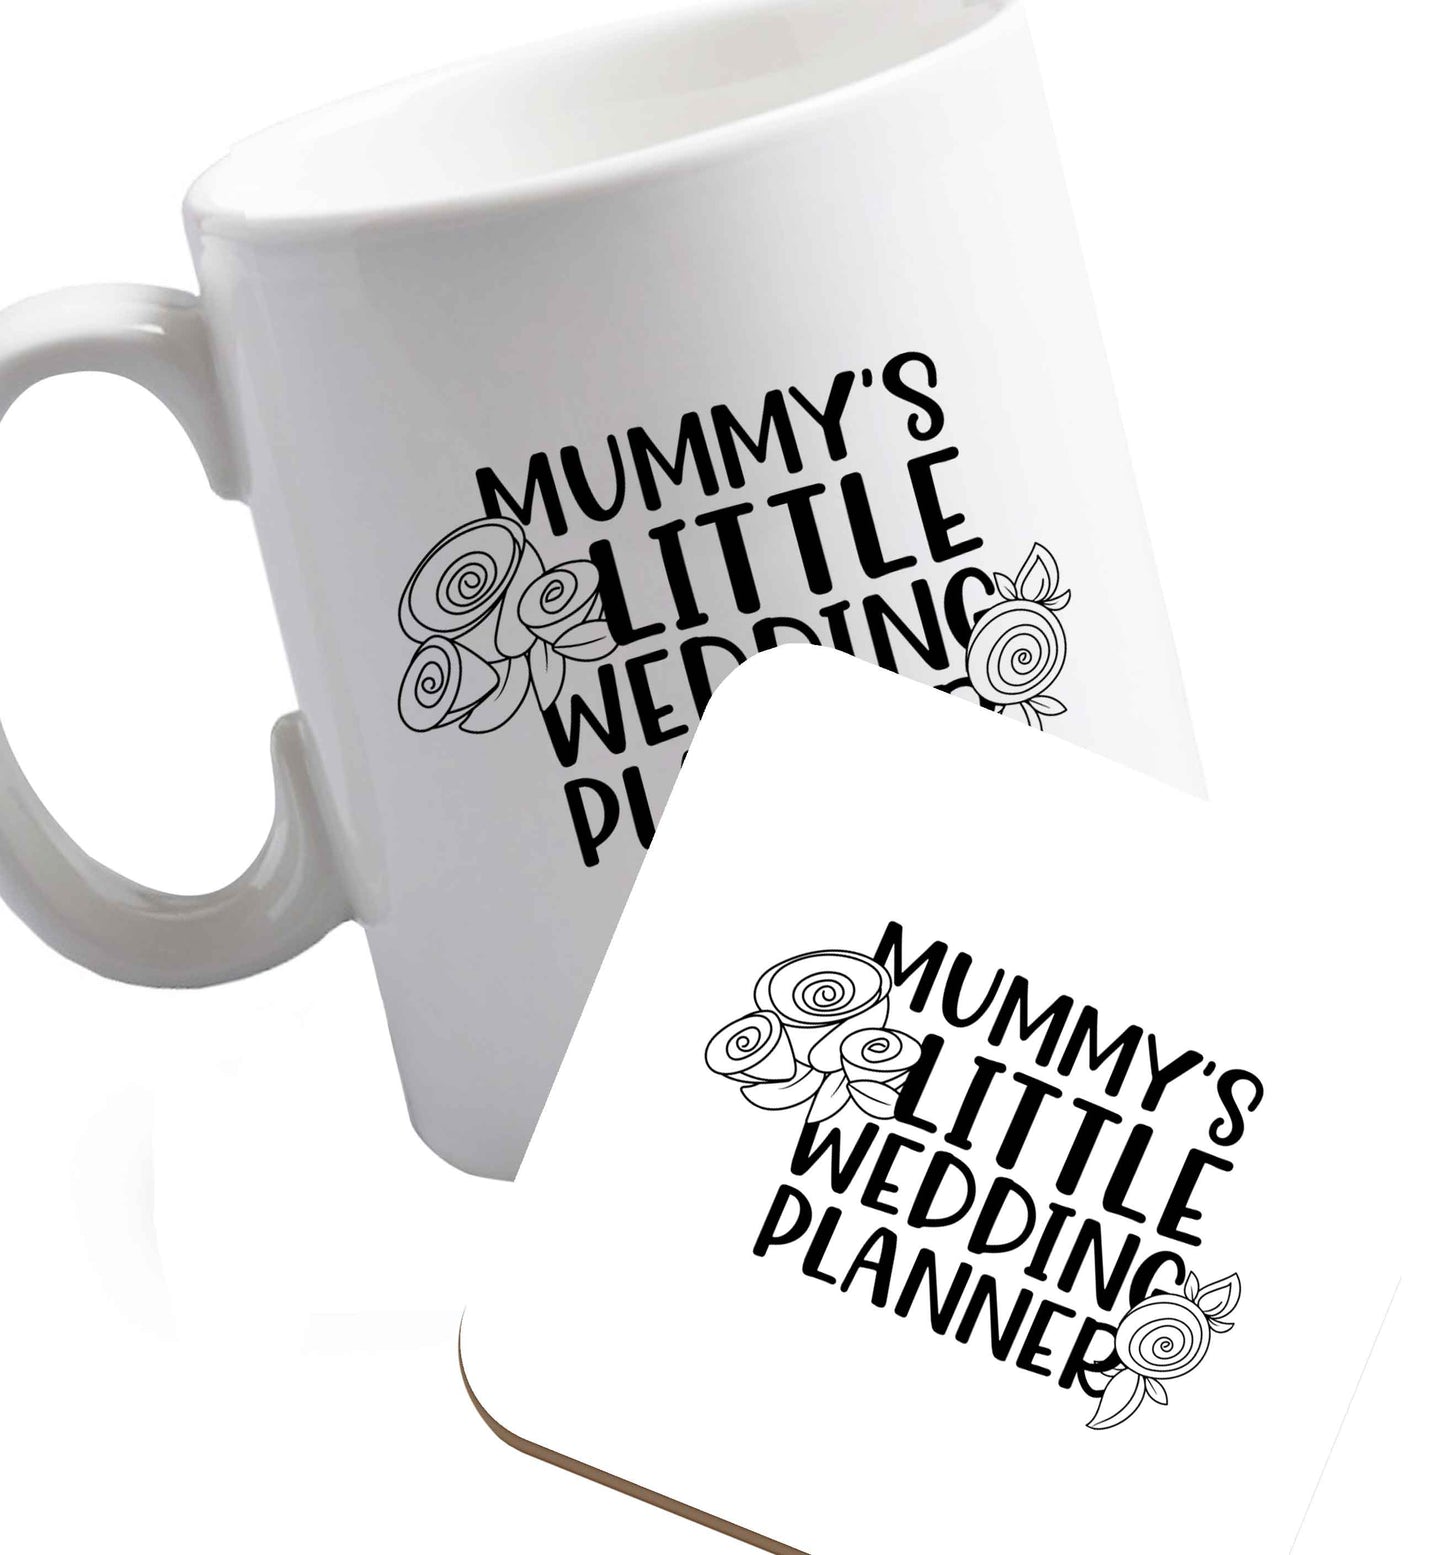 10 oz adorable wedding themed gifts for your mini wedding planner!   ceramic mug and coaster set right handed